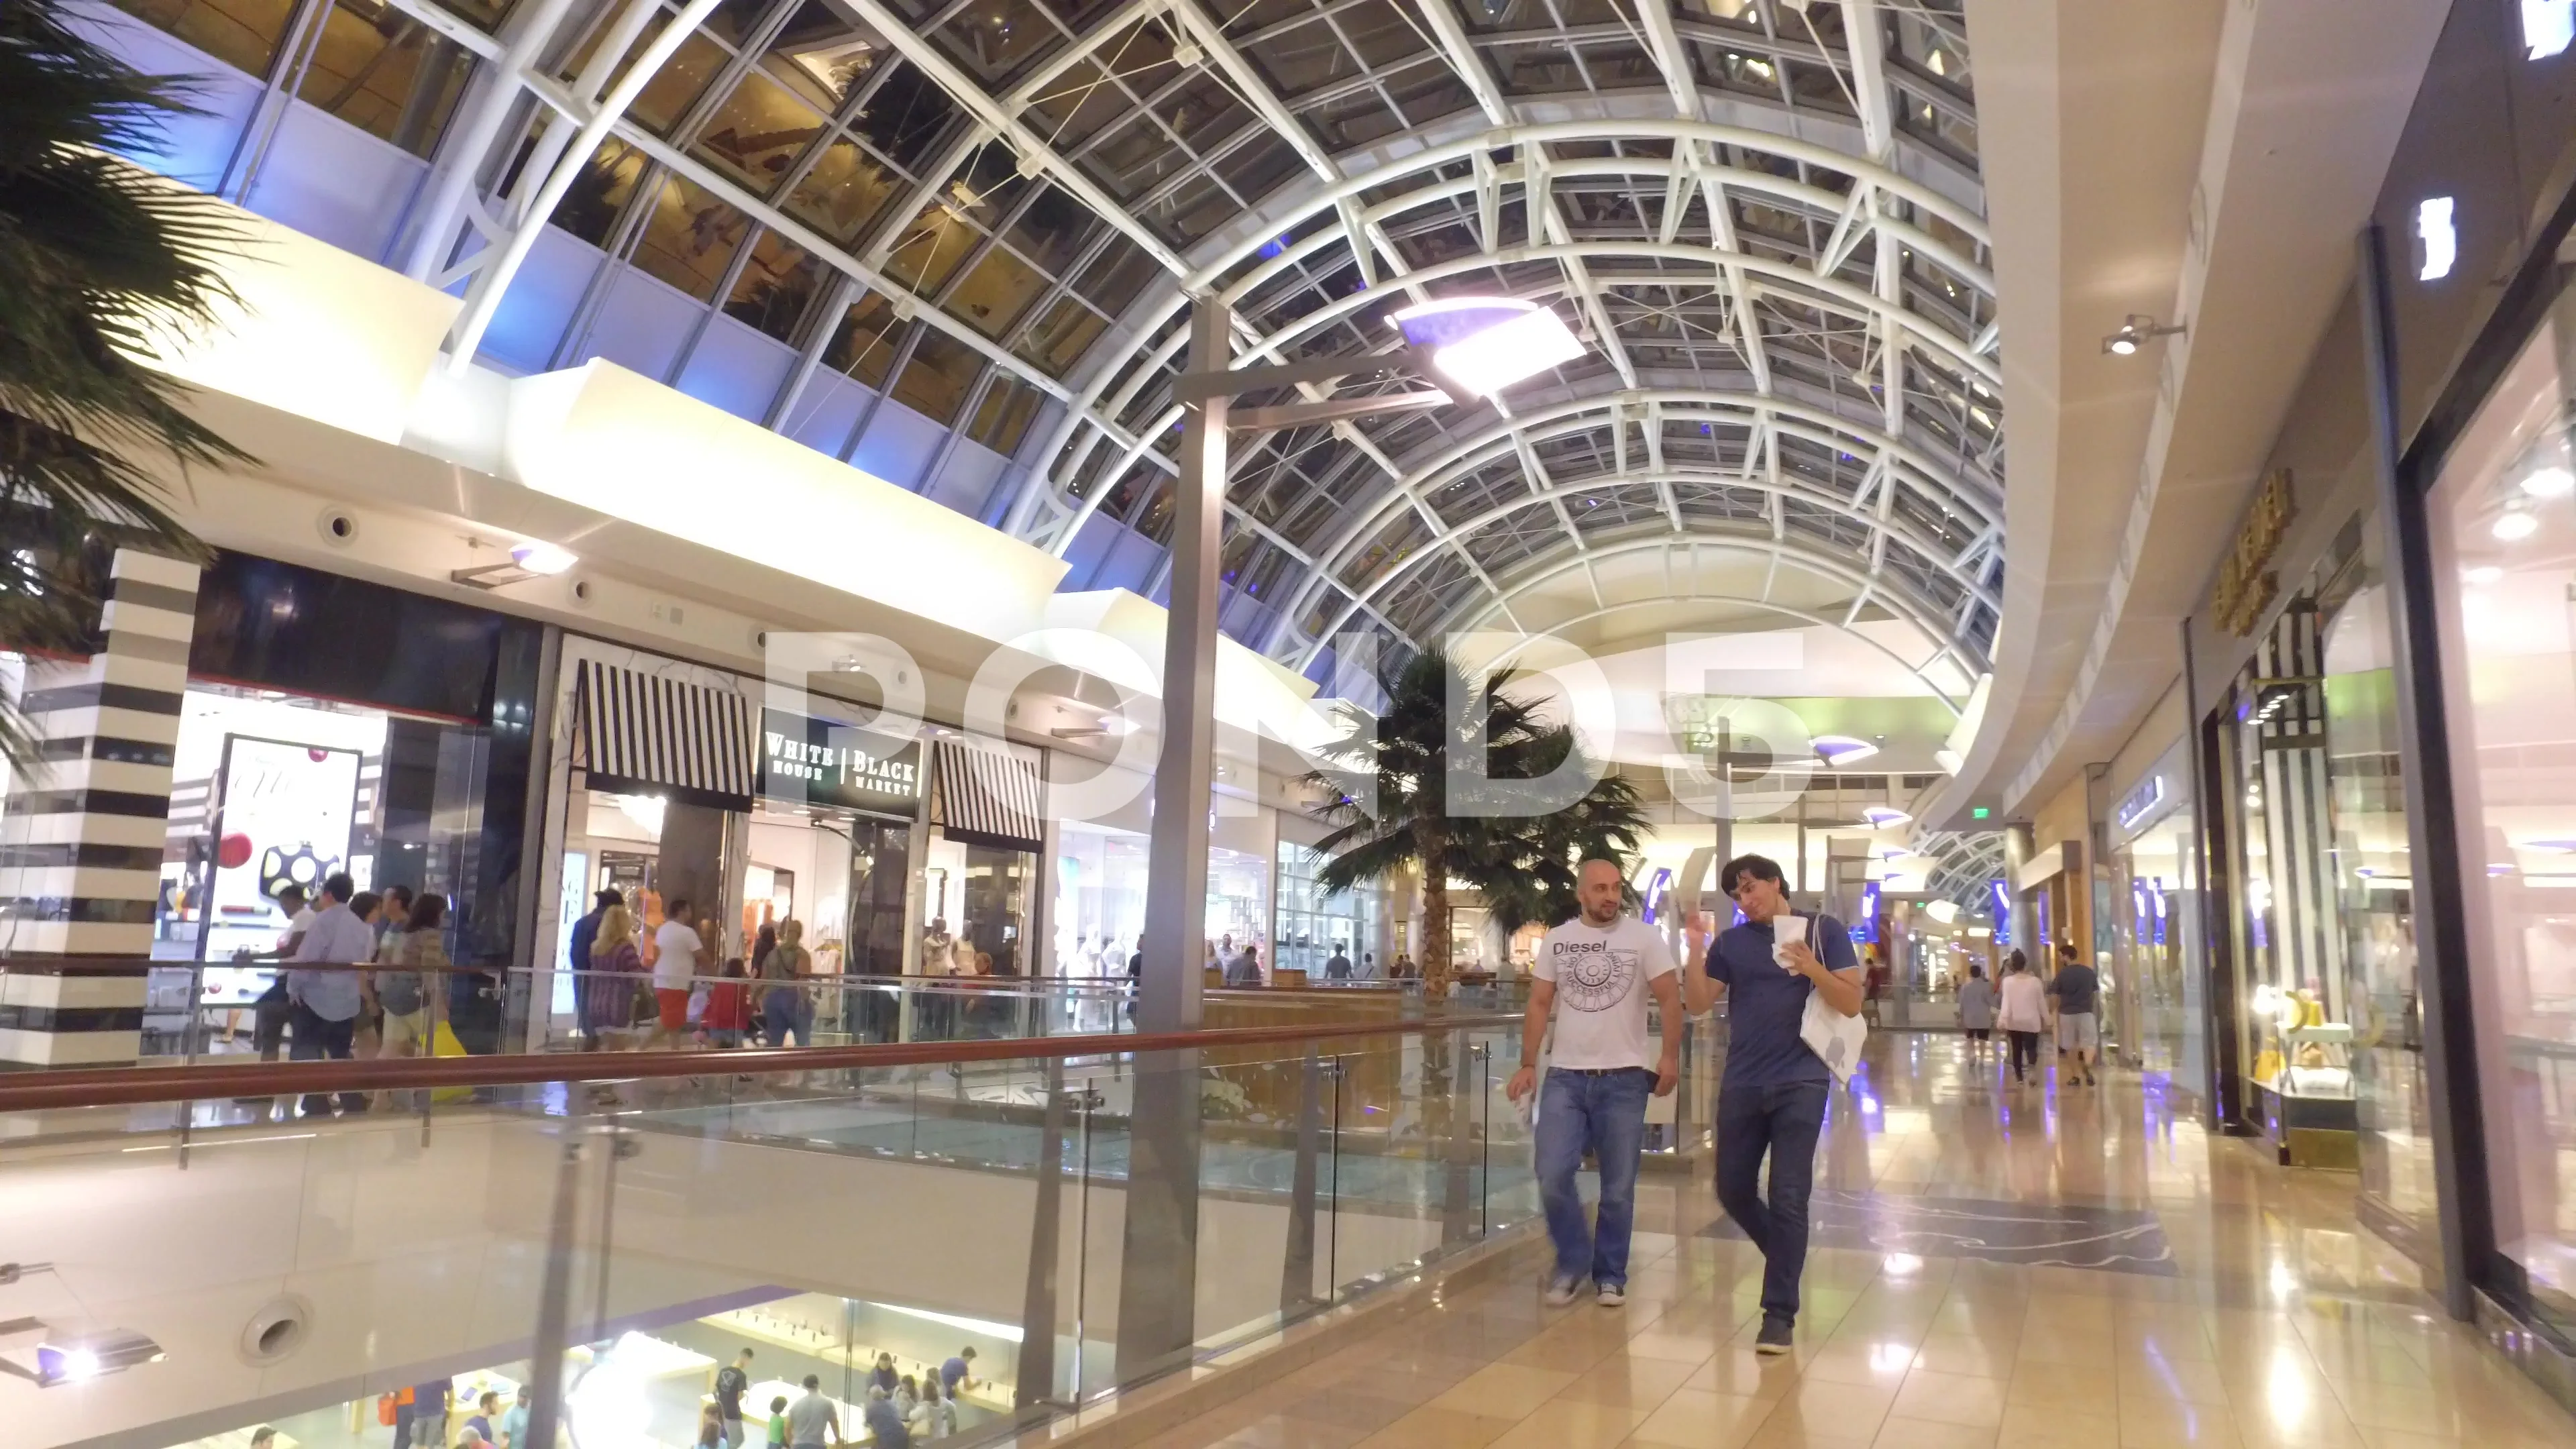 The Mall at Millenia - Take a trip to orlando